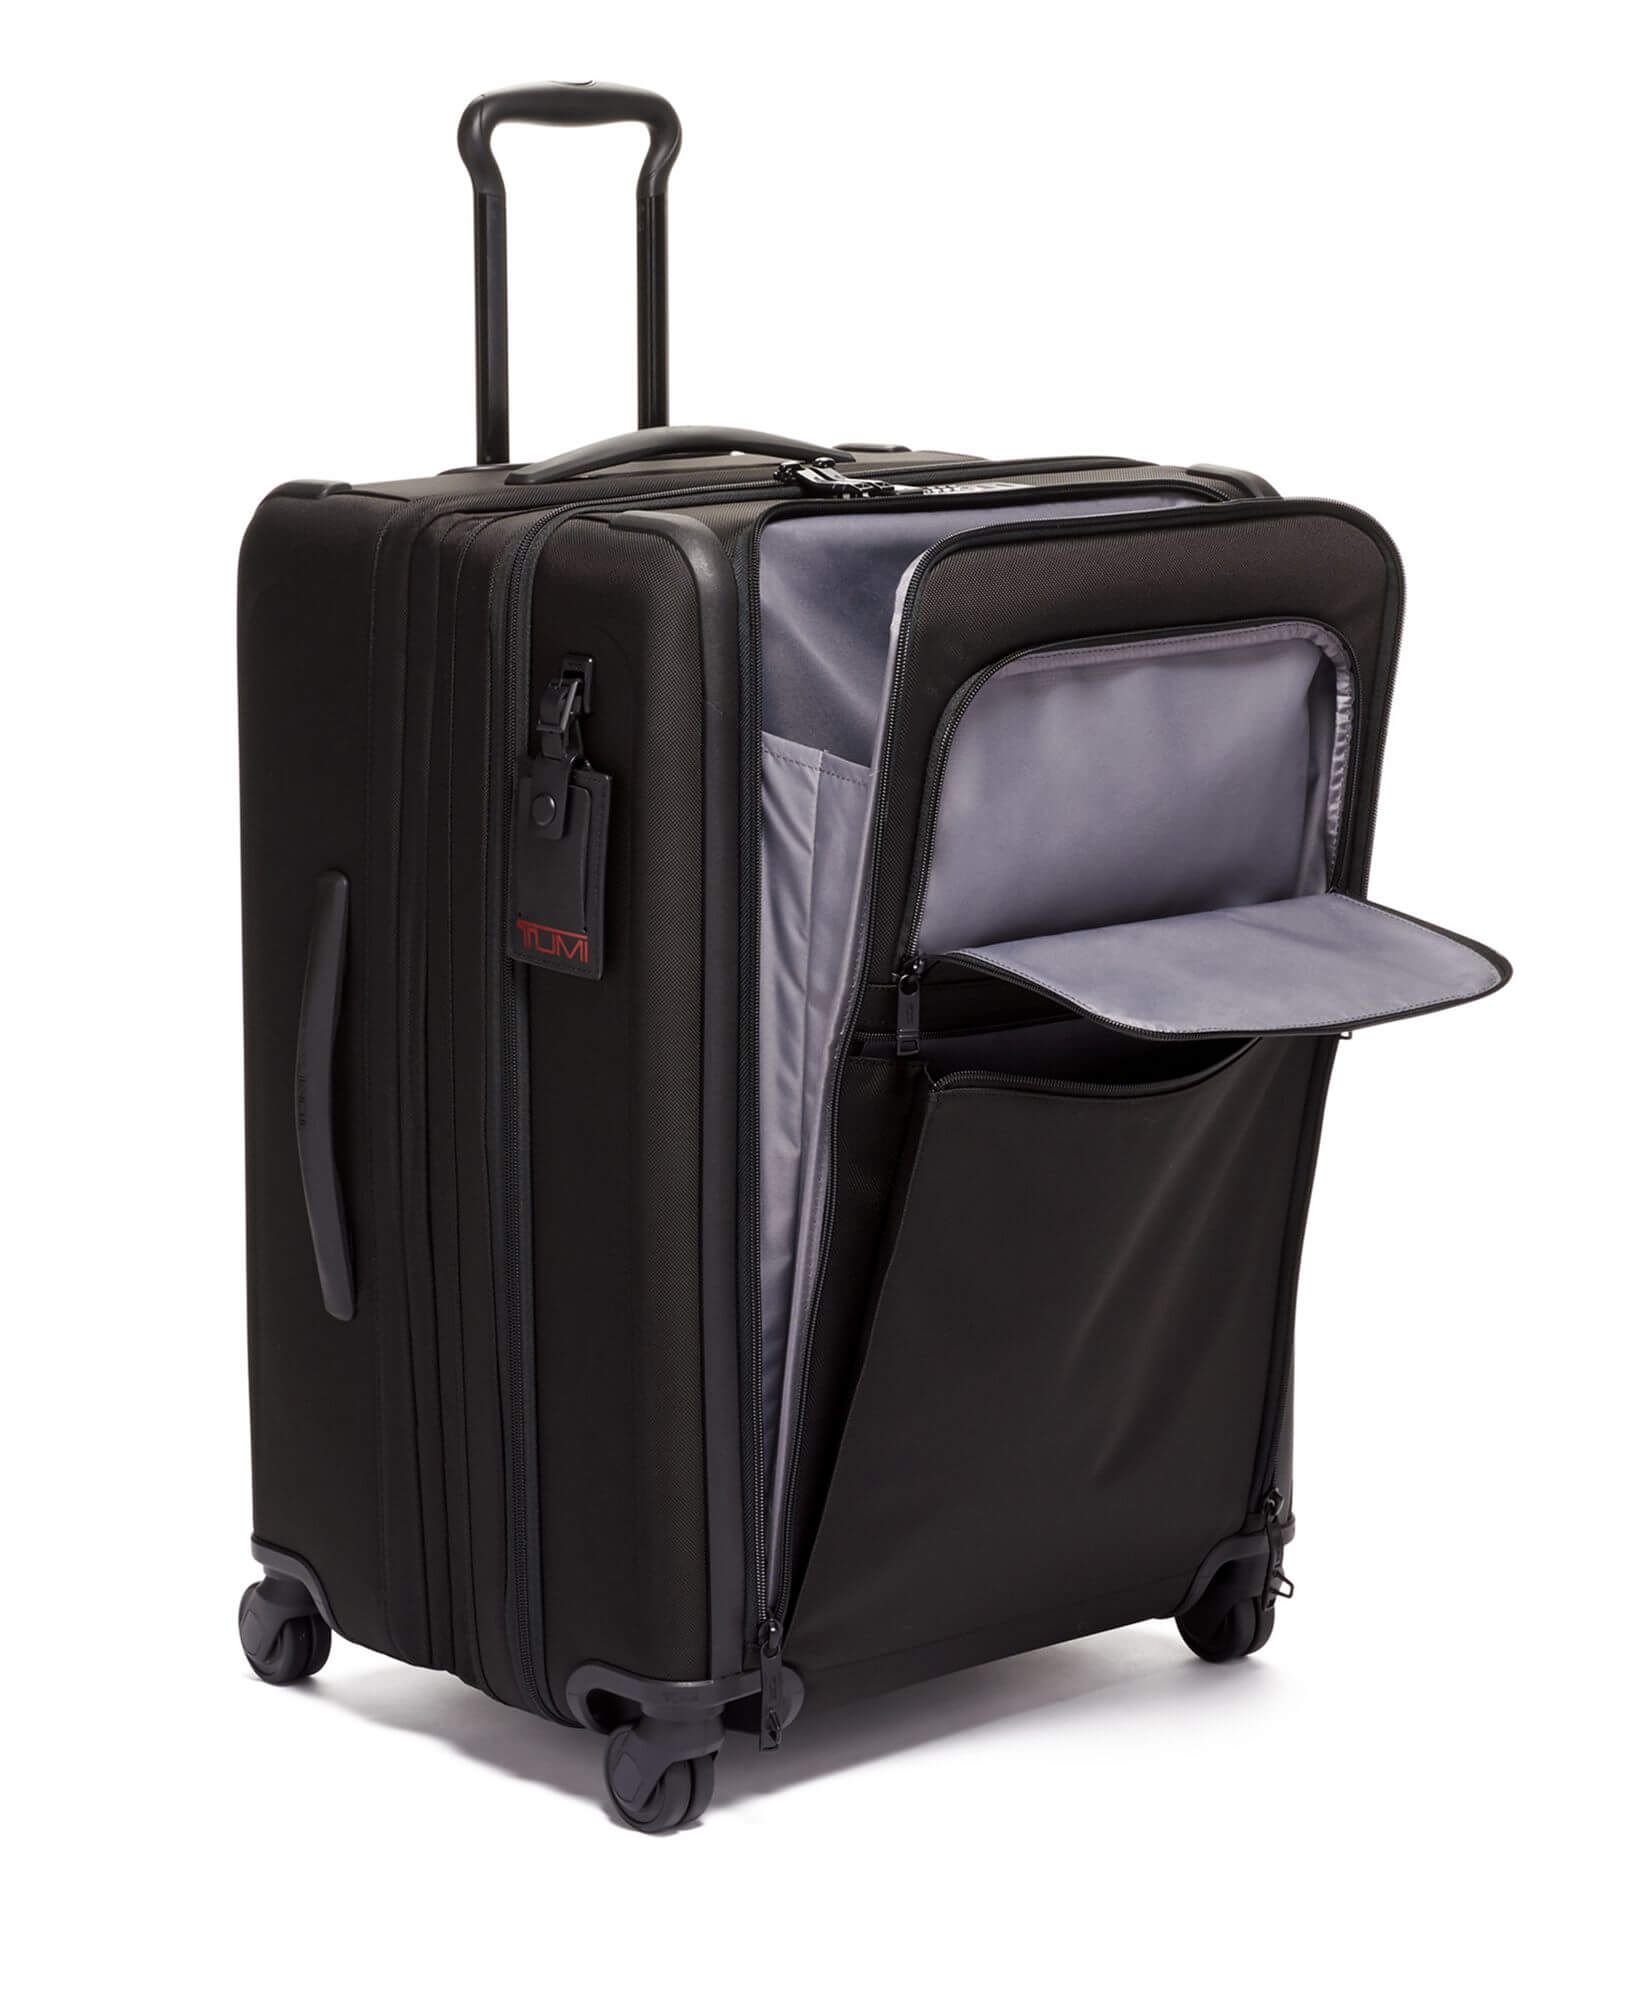 tumi short trip expandable black suitcase with open front pocket